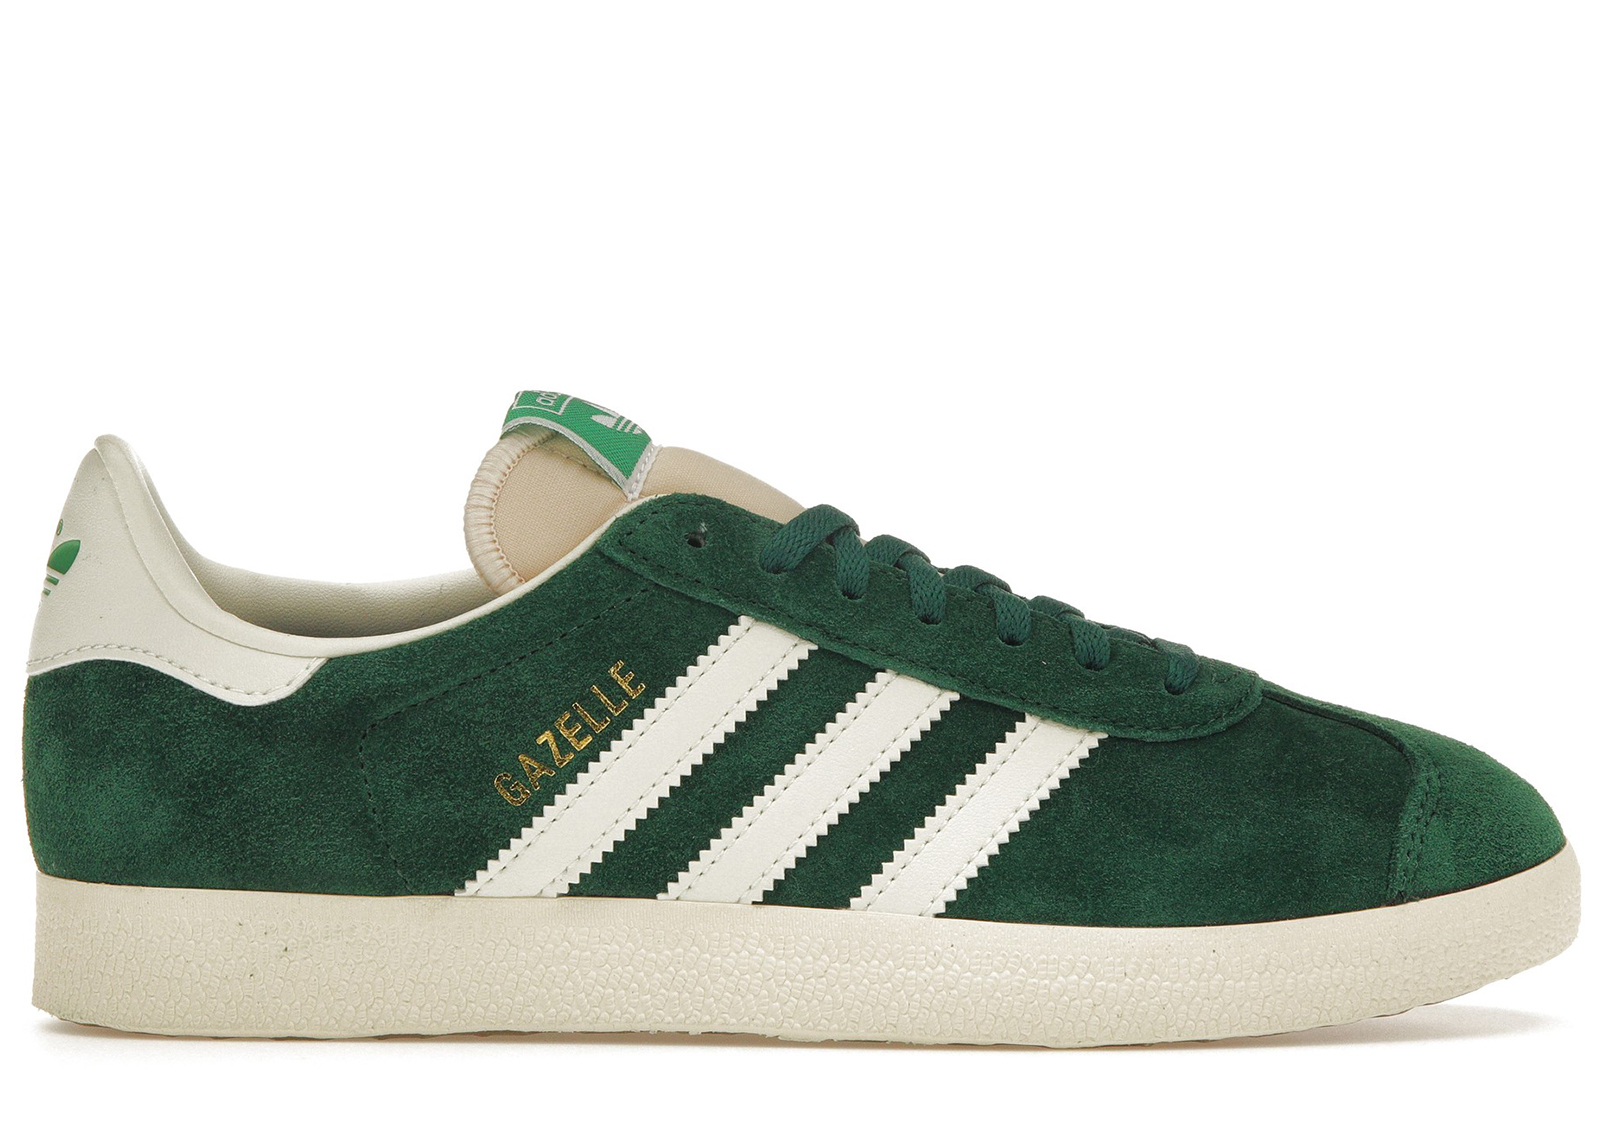 adidas Gazelle Faded Archive Men's - GY7338 - US